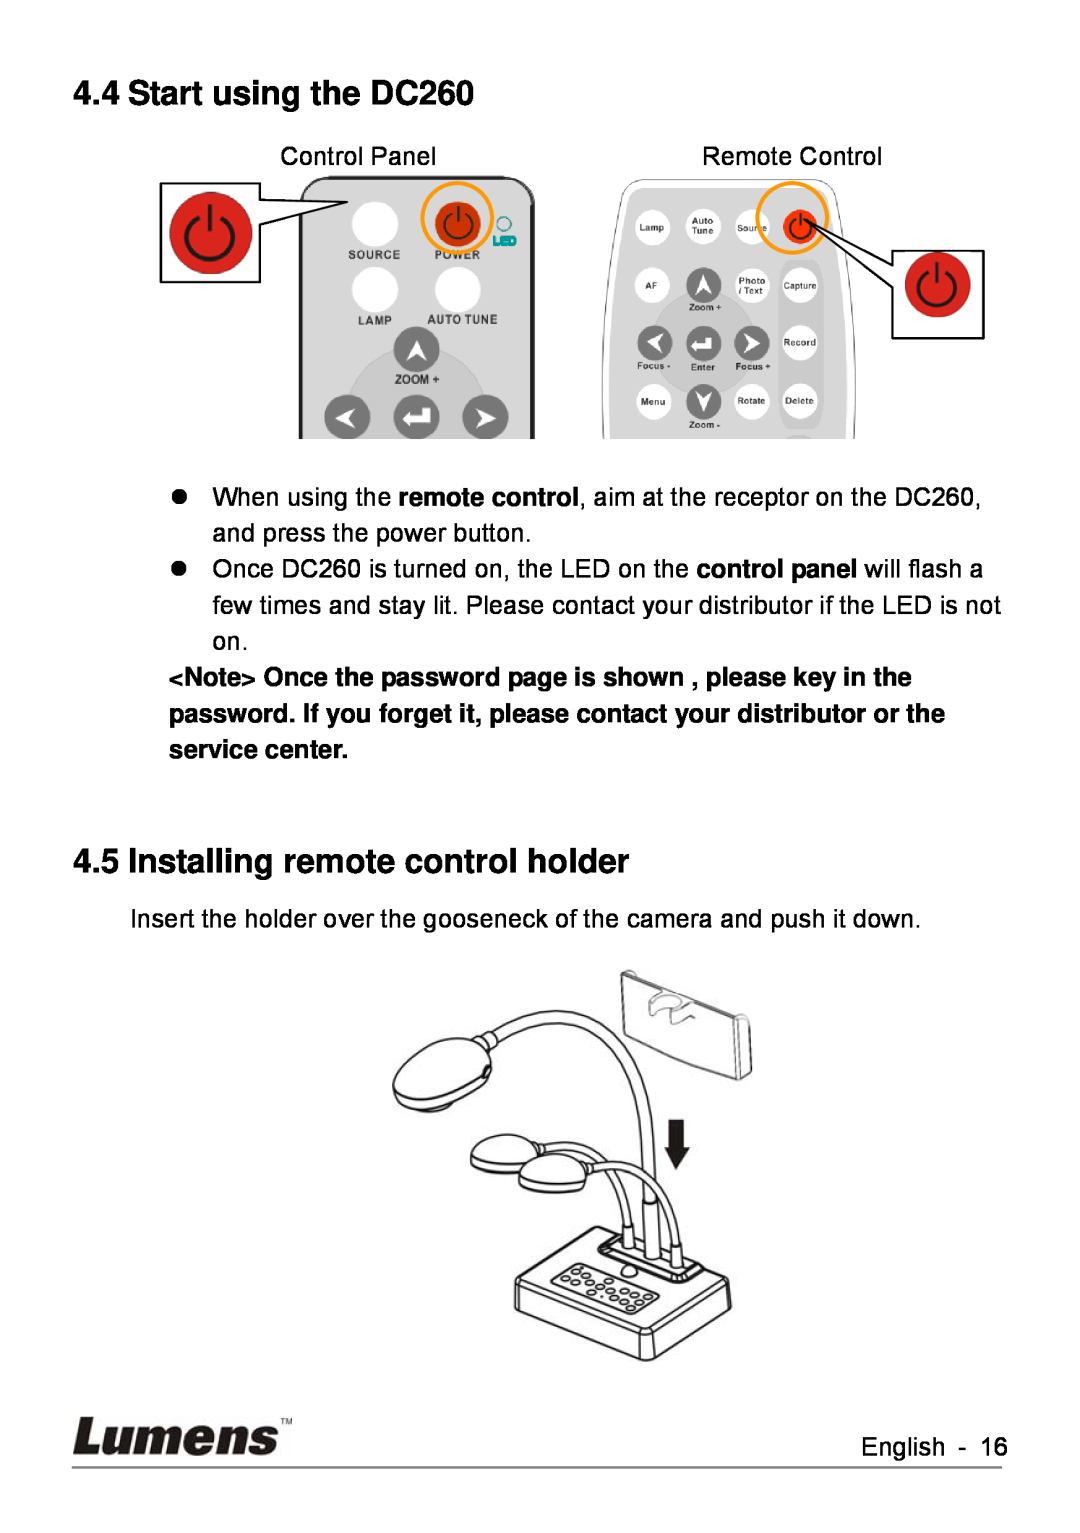 Lumens Technology user manual Start using the DC260, Installing remote control holder 